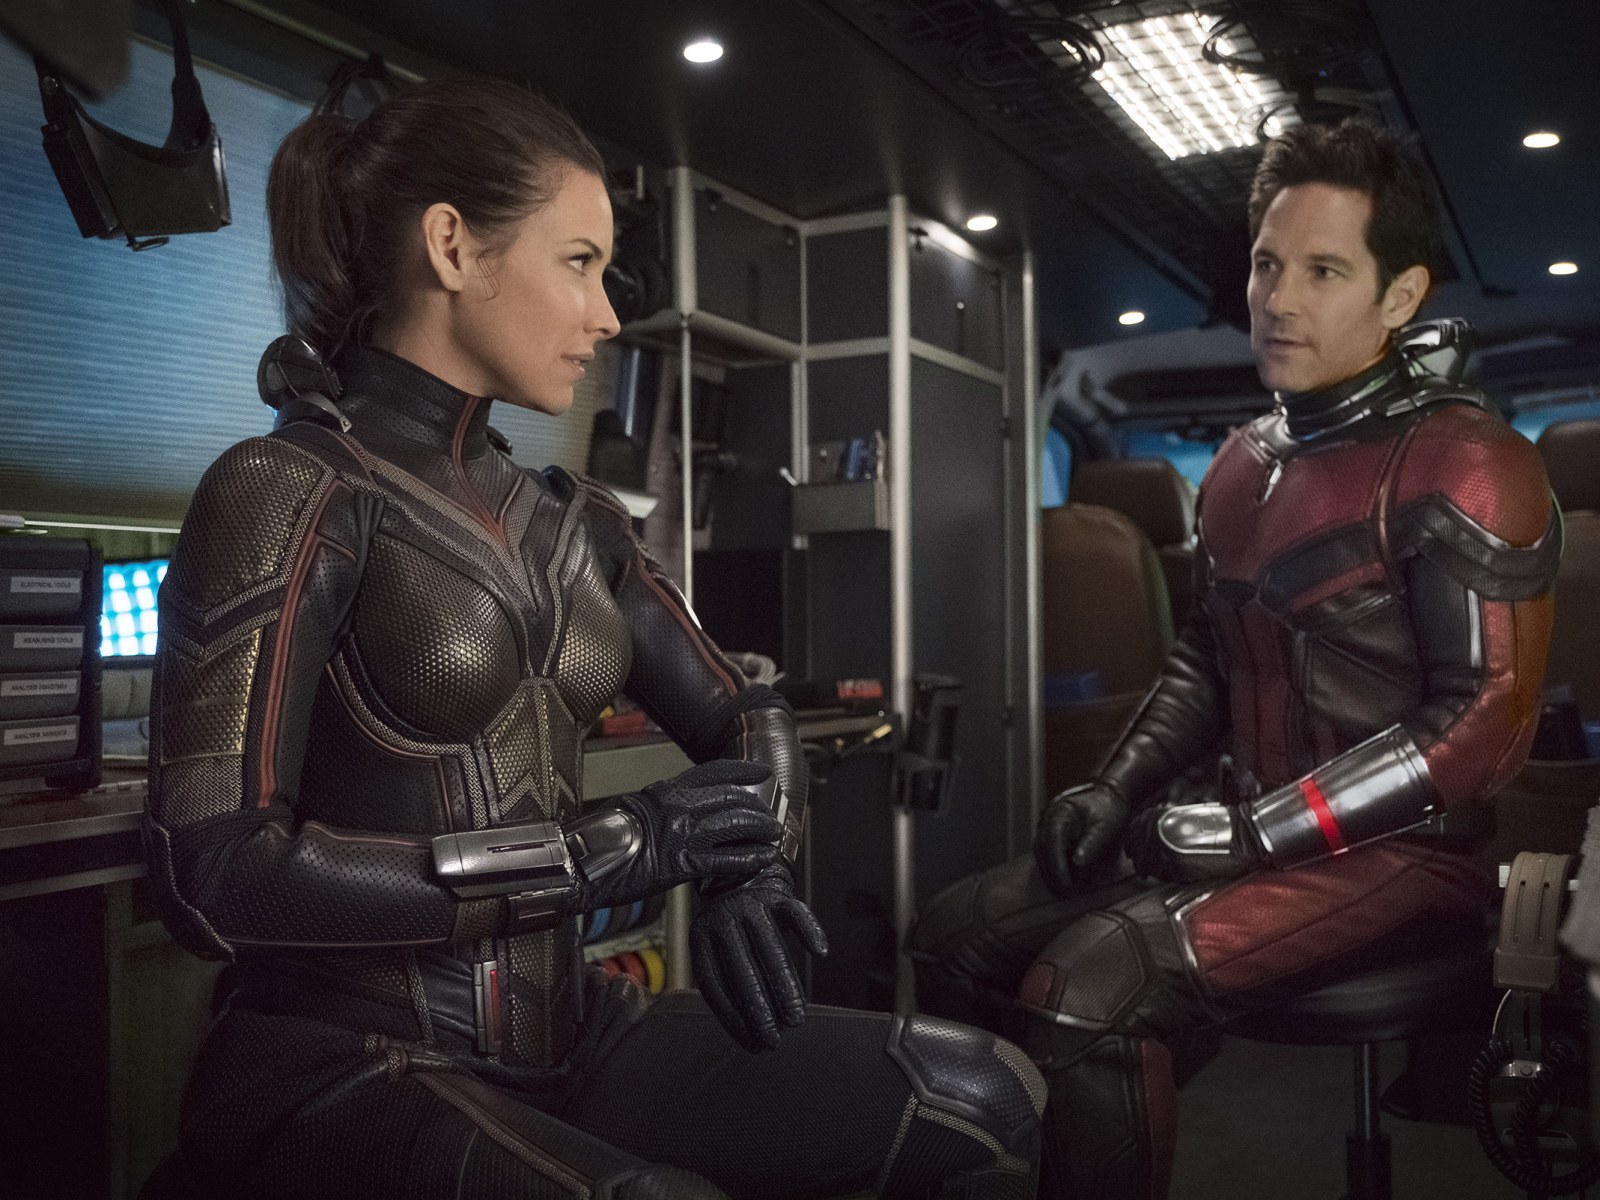 Ant-Man and the Wasp: Quantumania: Release date and cast